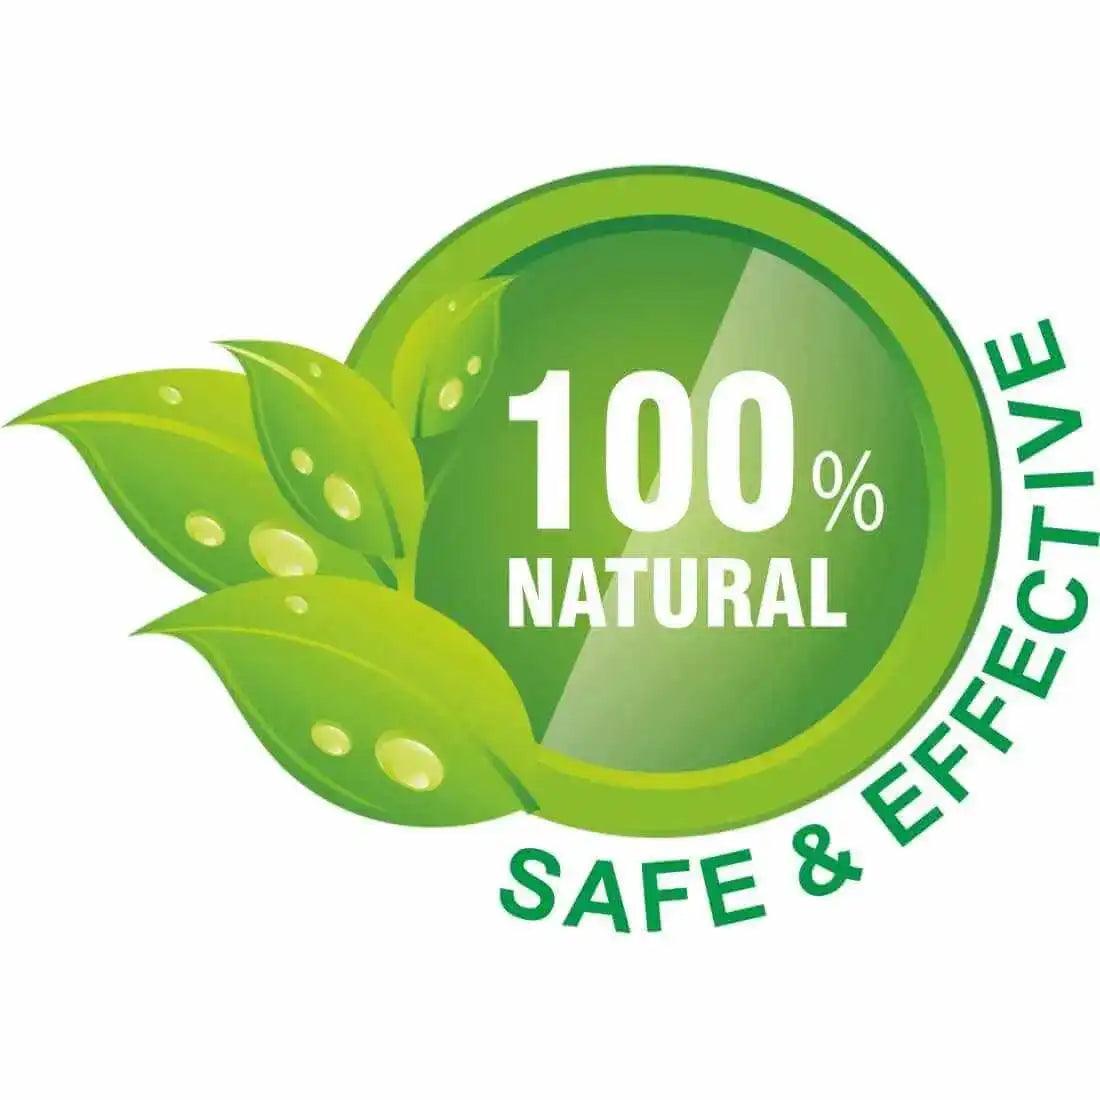 Nature Sure Lungs Pure is Natural, Safe and Effective - everteen-neud.com